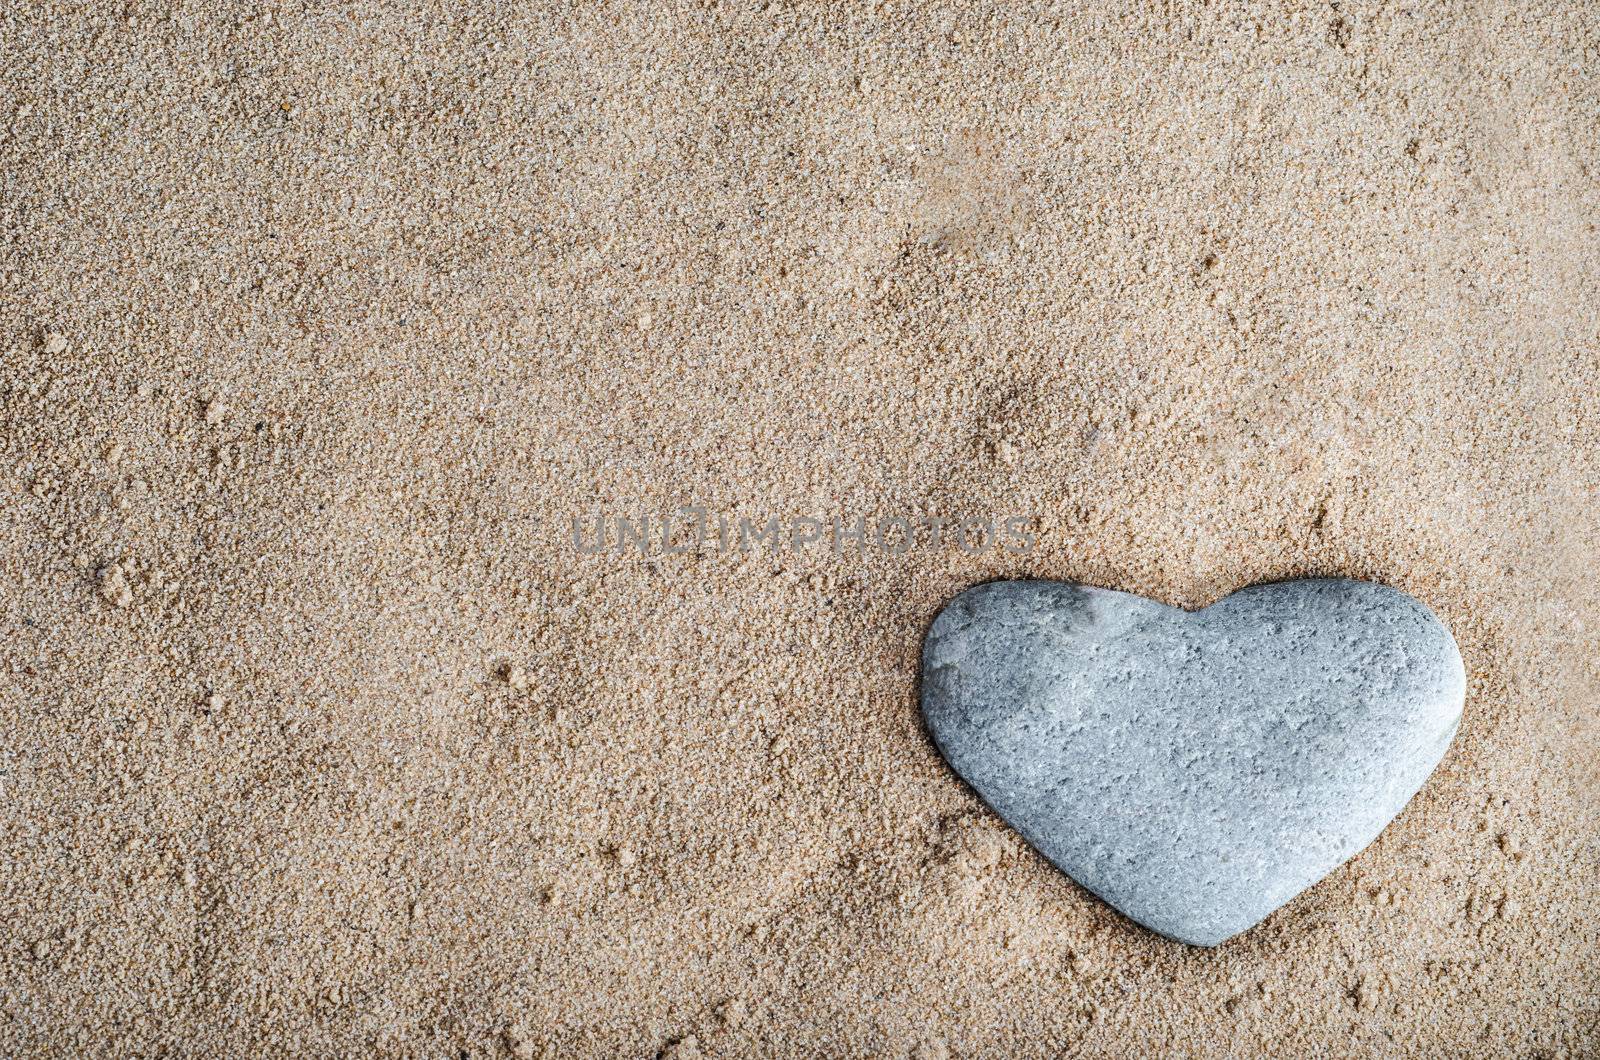 Stone Heart in Sand by frannyanne